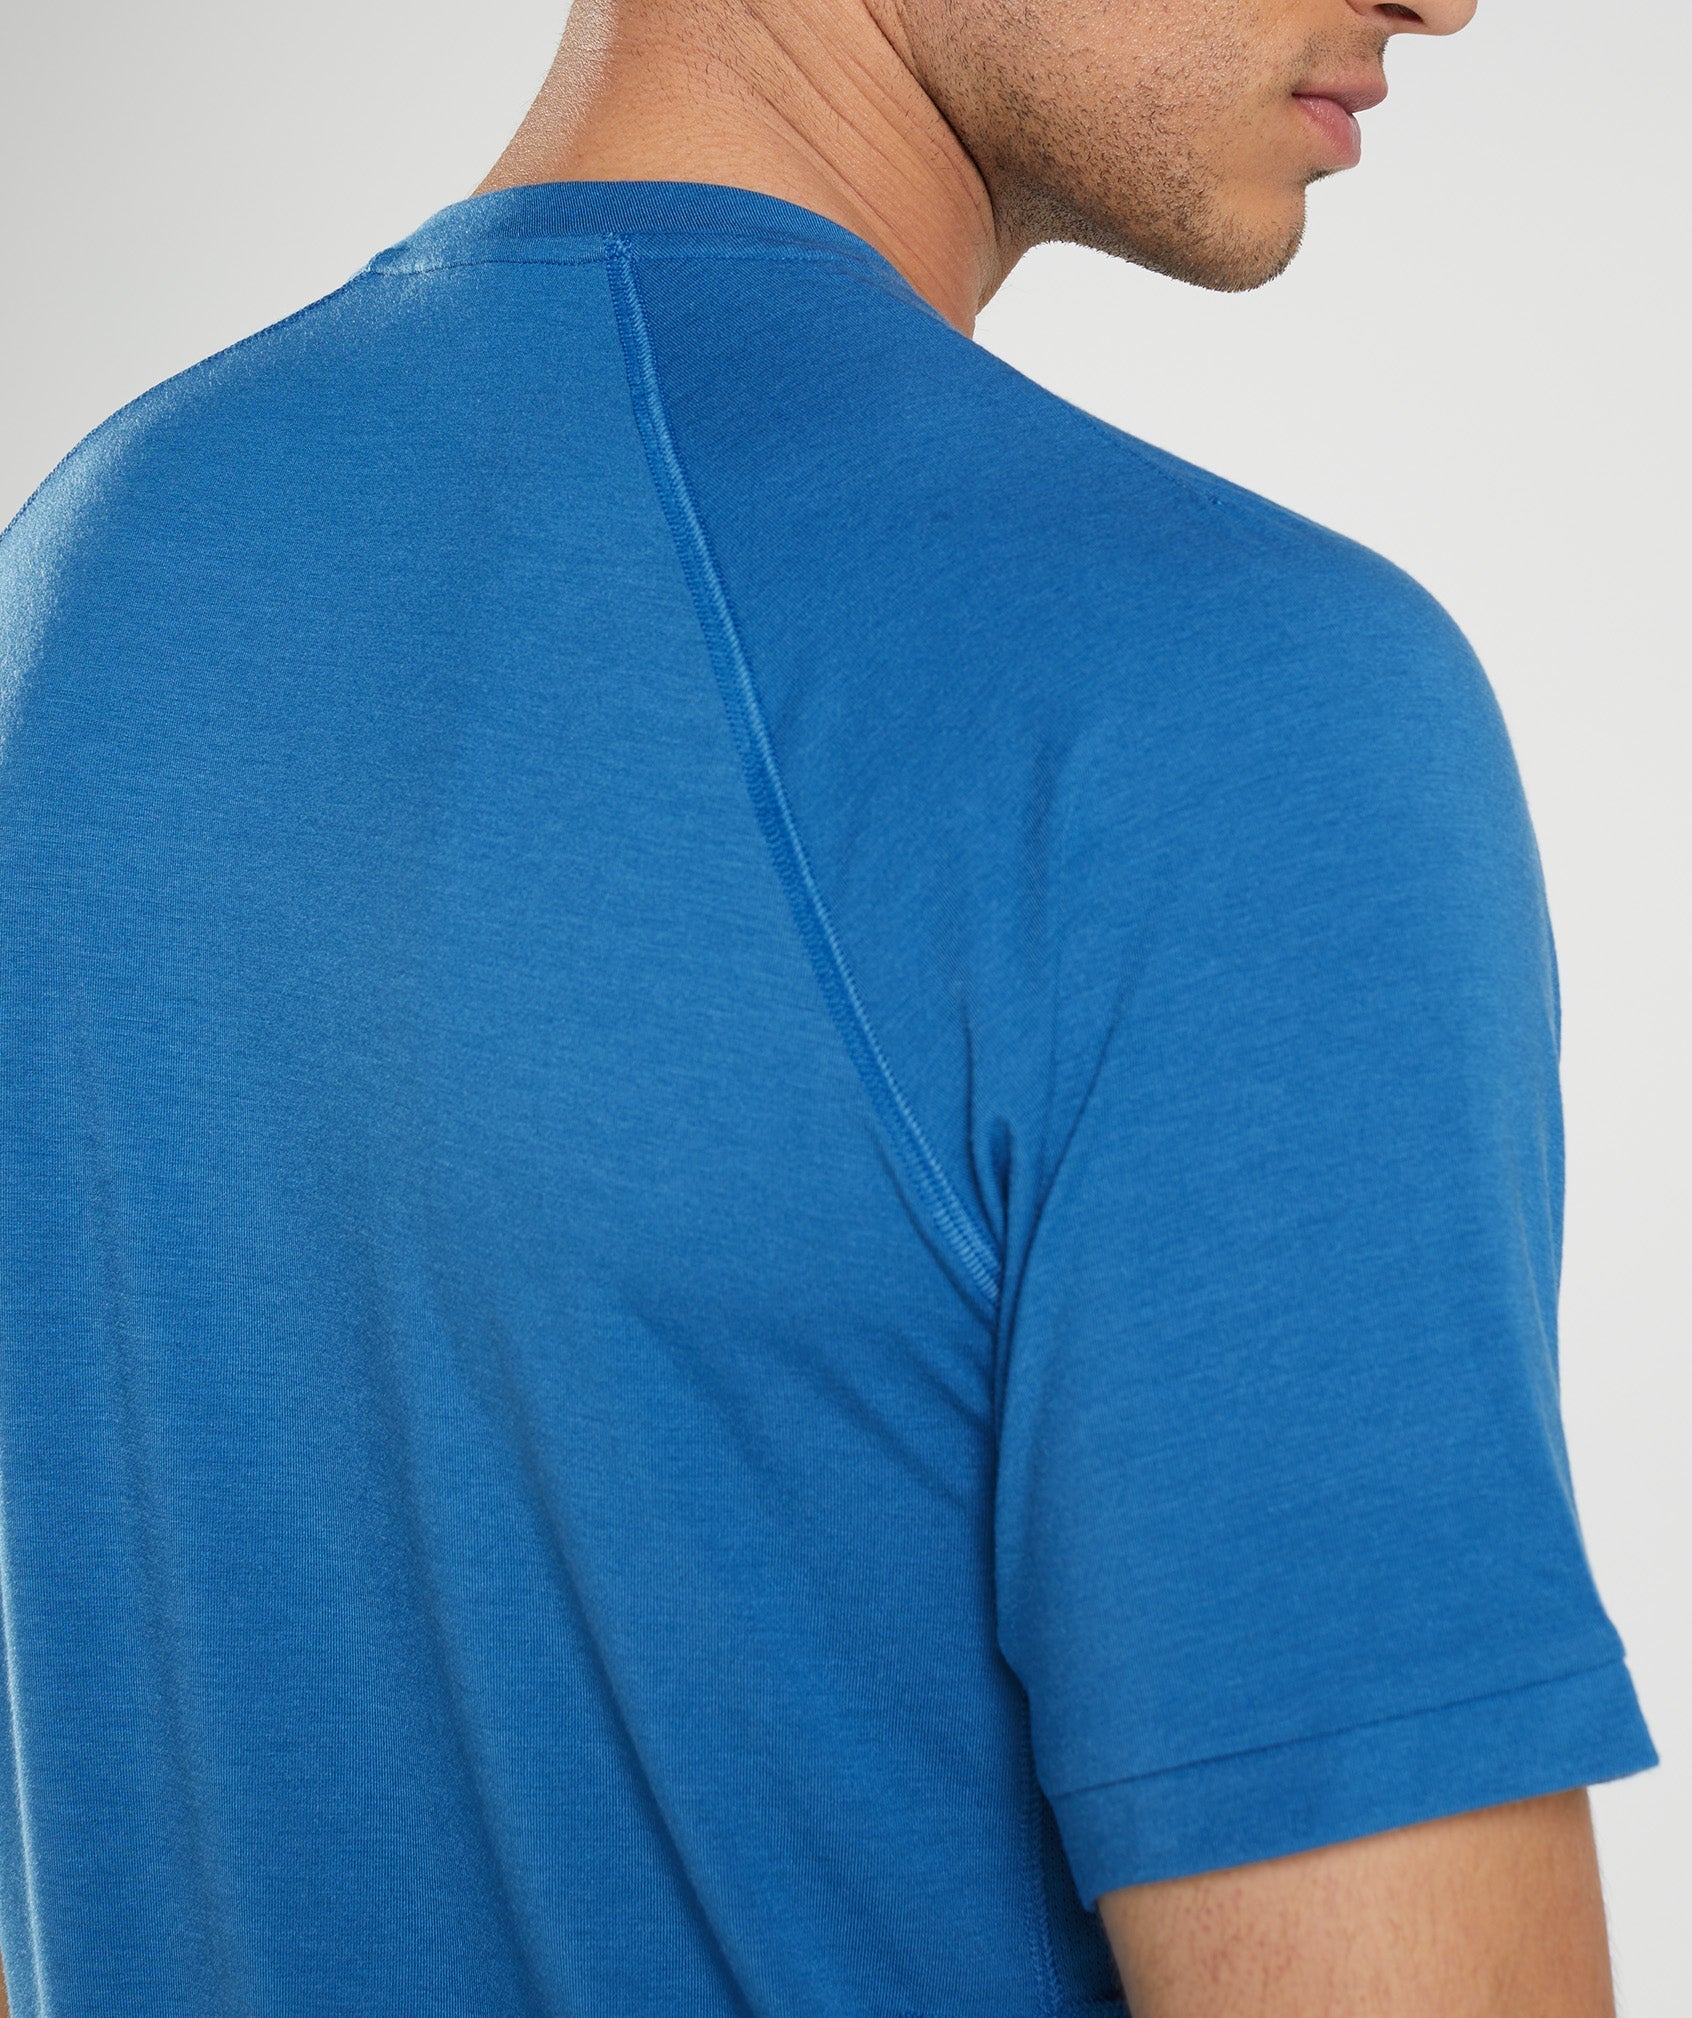 Studio T-Shirt in Lakeside Blue - view 5